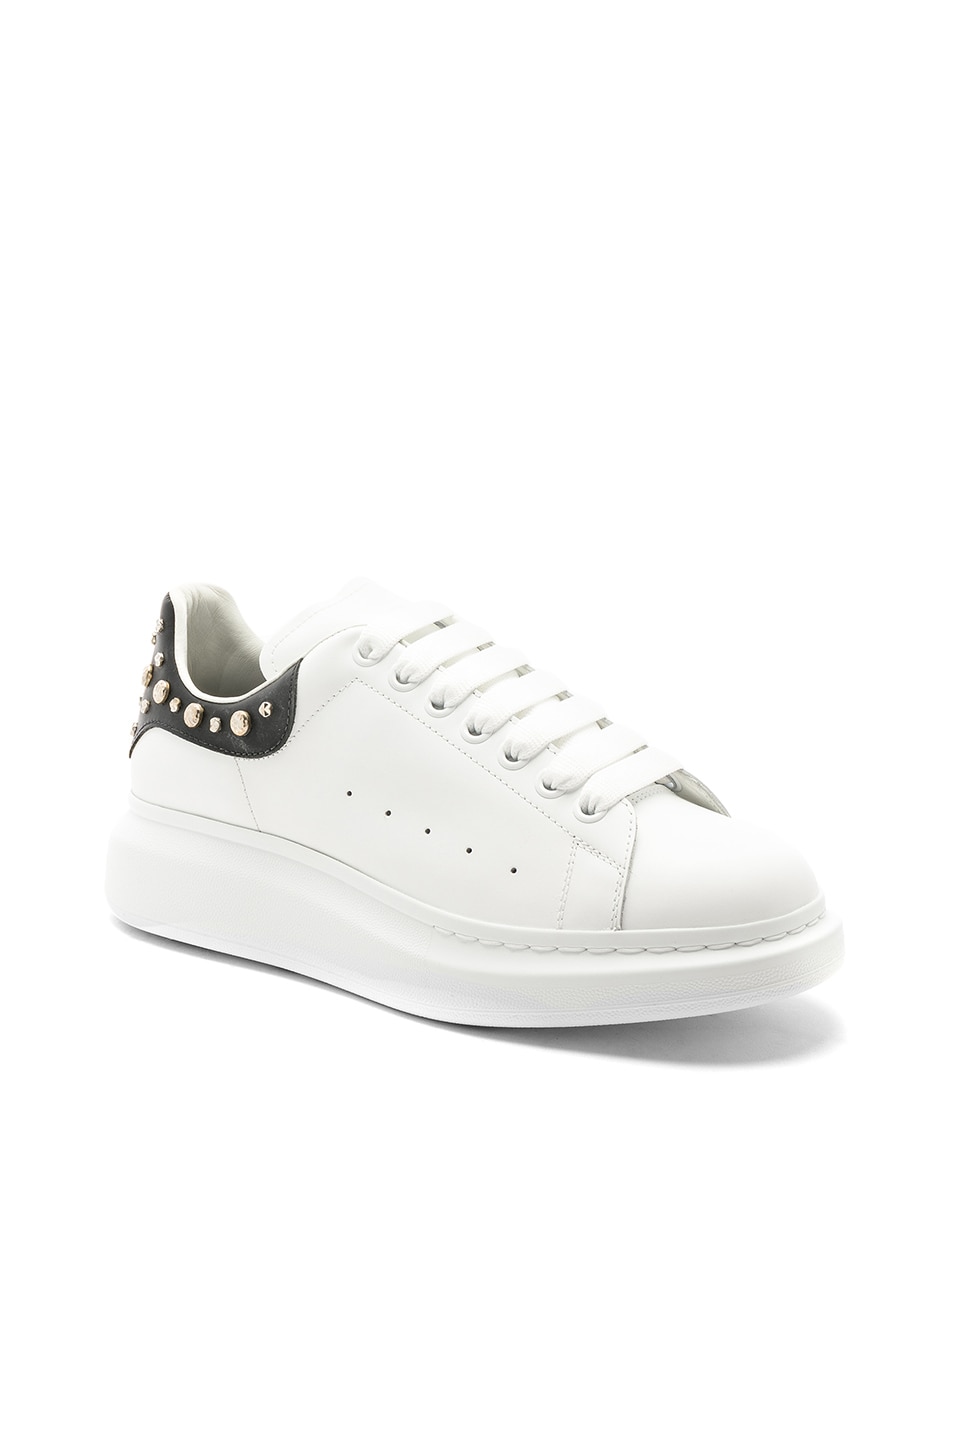 Image 1 of Alexander McQueen Leather Platform Sneakers in Black & White